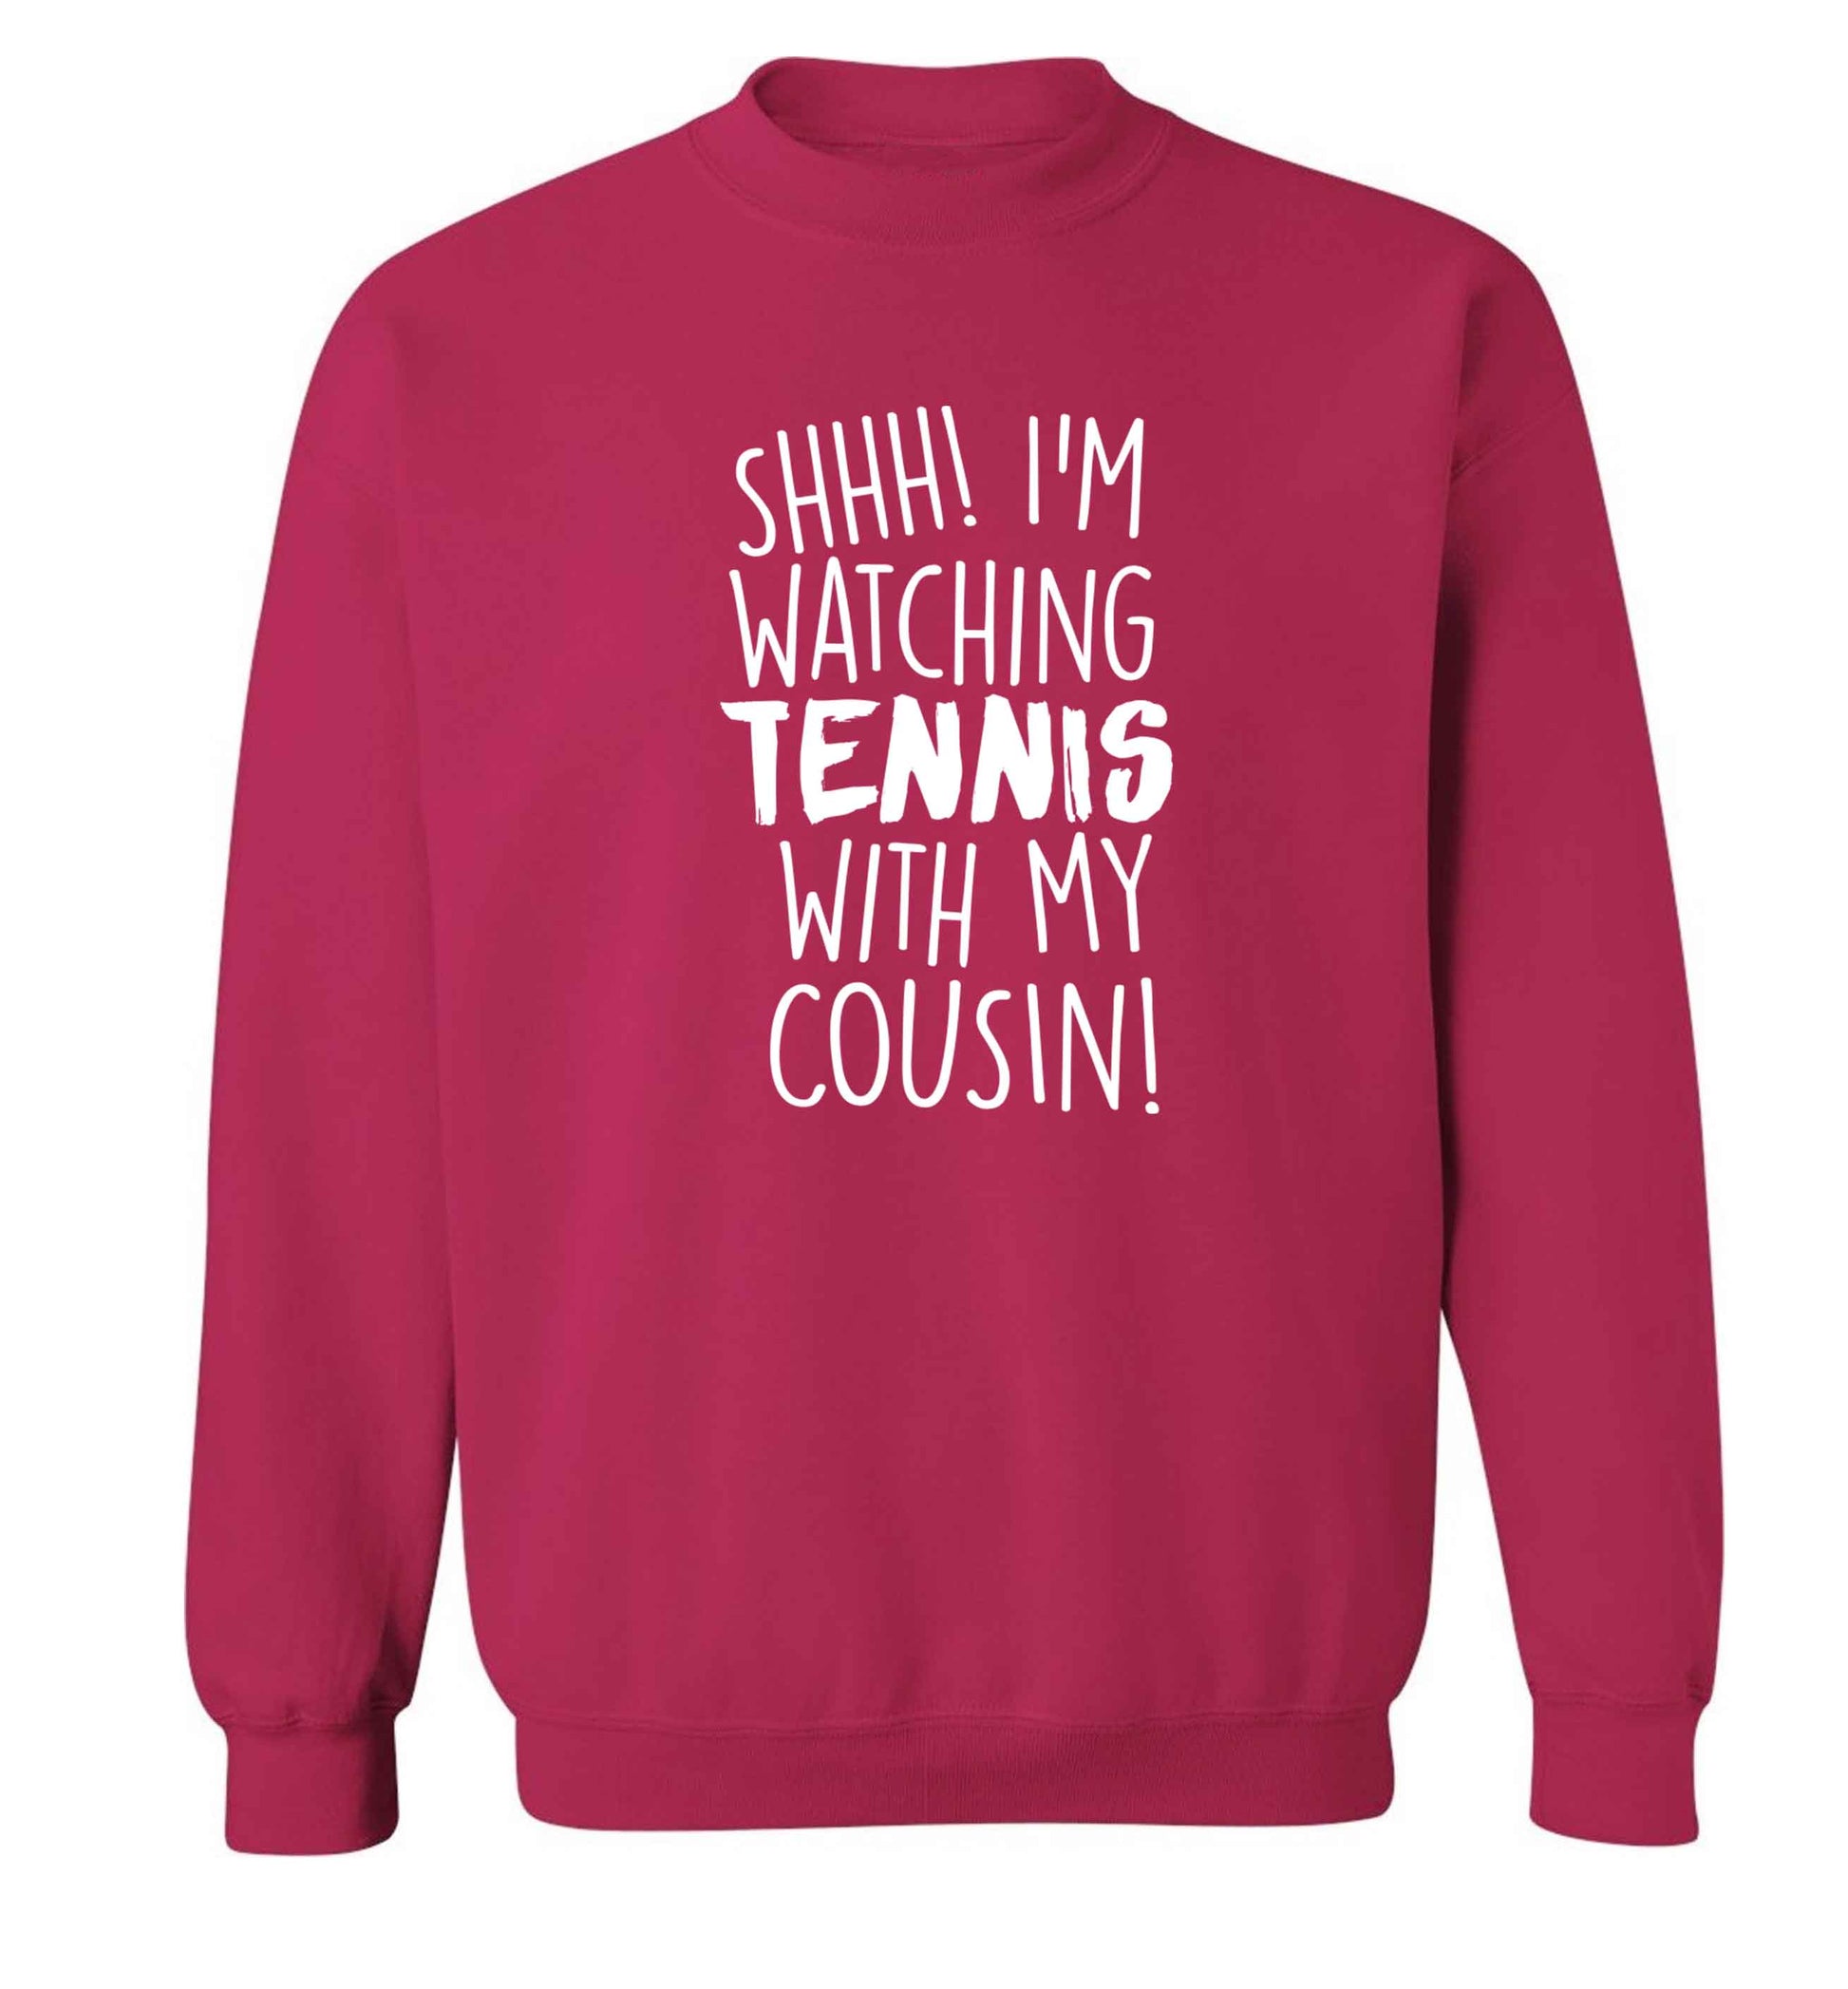 Shh! I'm watching tennis with my cousin! Adult's unisex pink Sweater 2XL